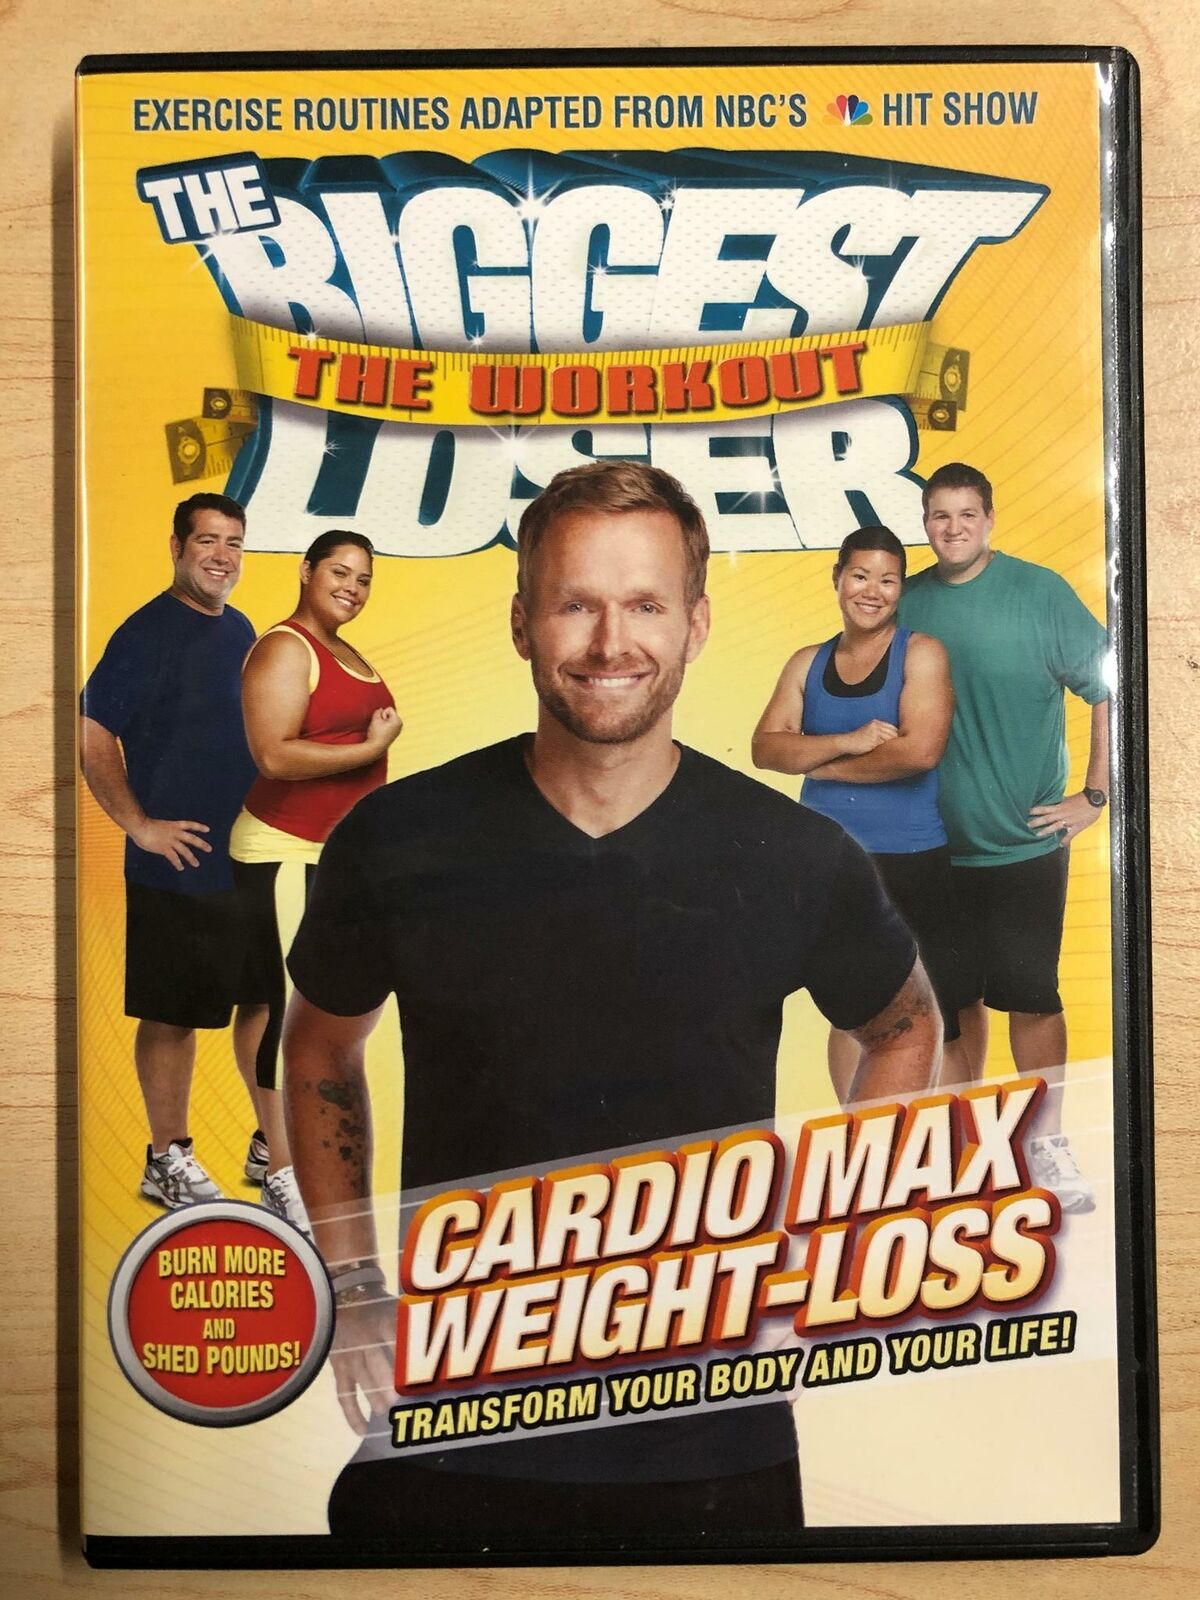 The Biggest Loser The Workout Cardio Max Weight-Loss (DVD, exercise) - I1030